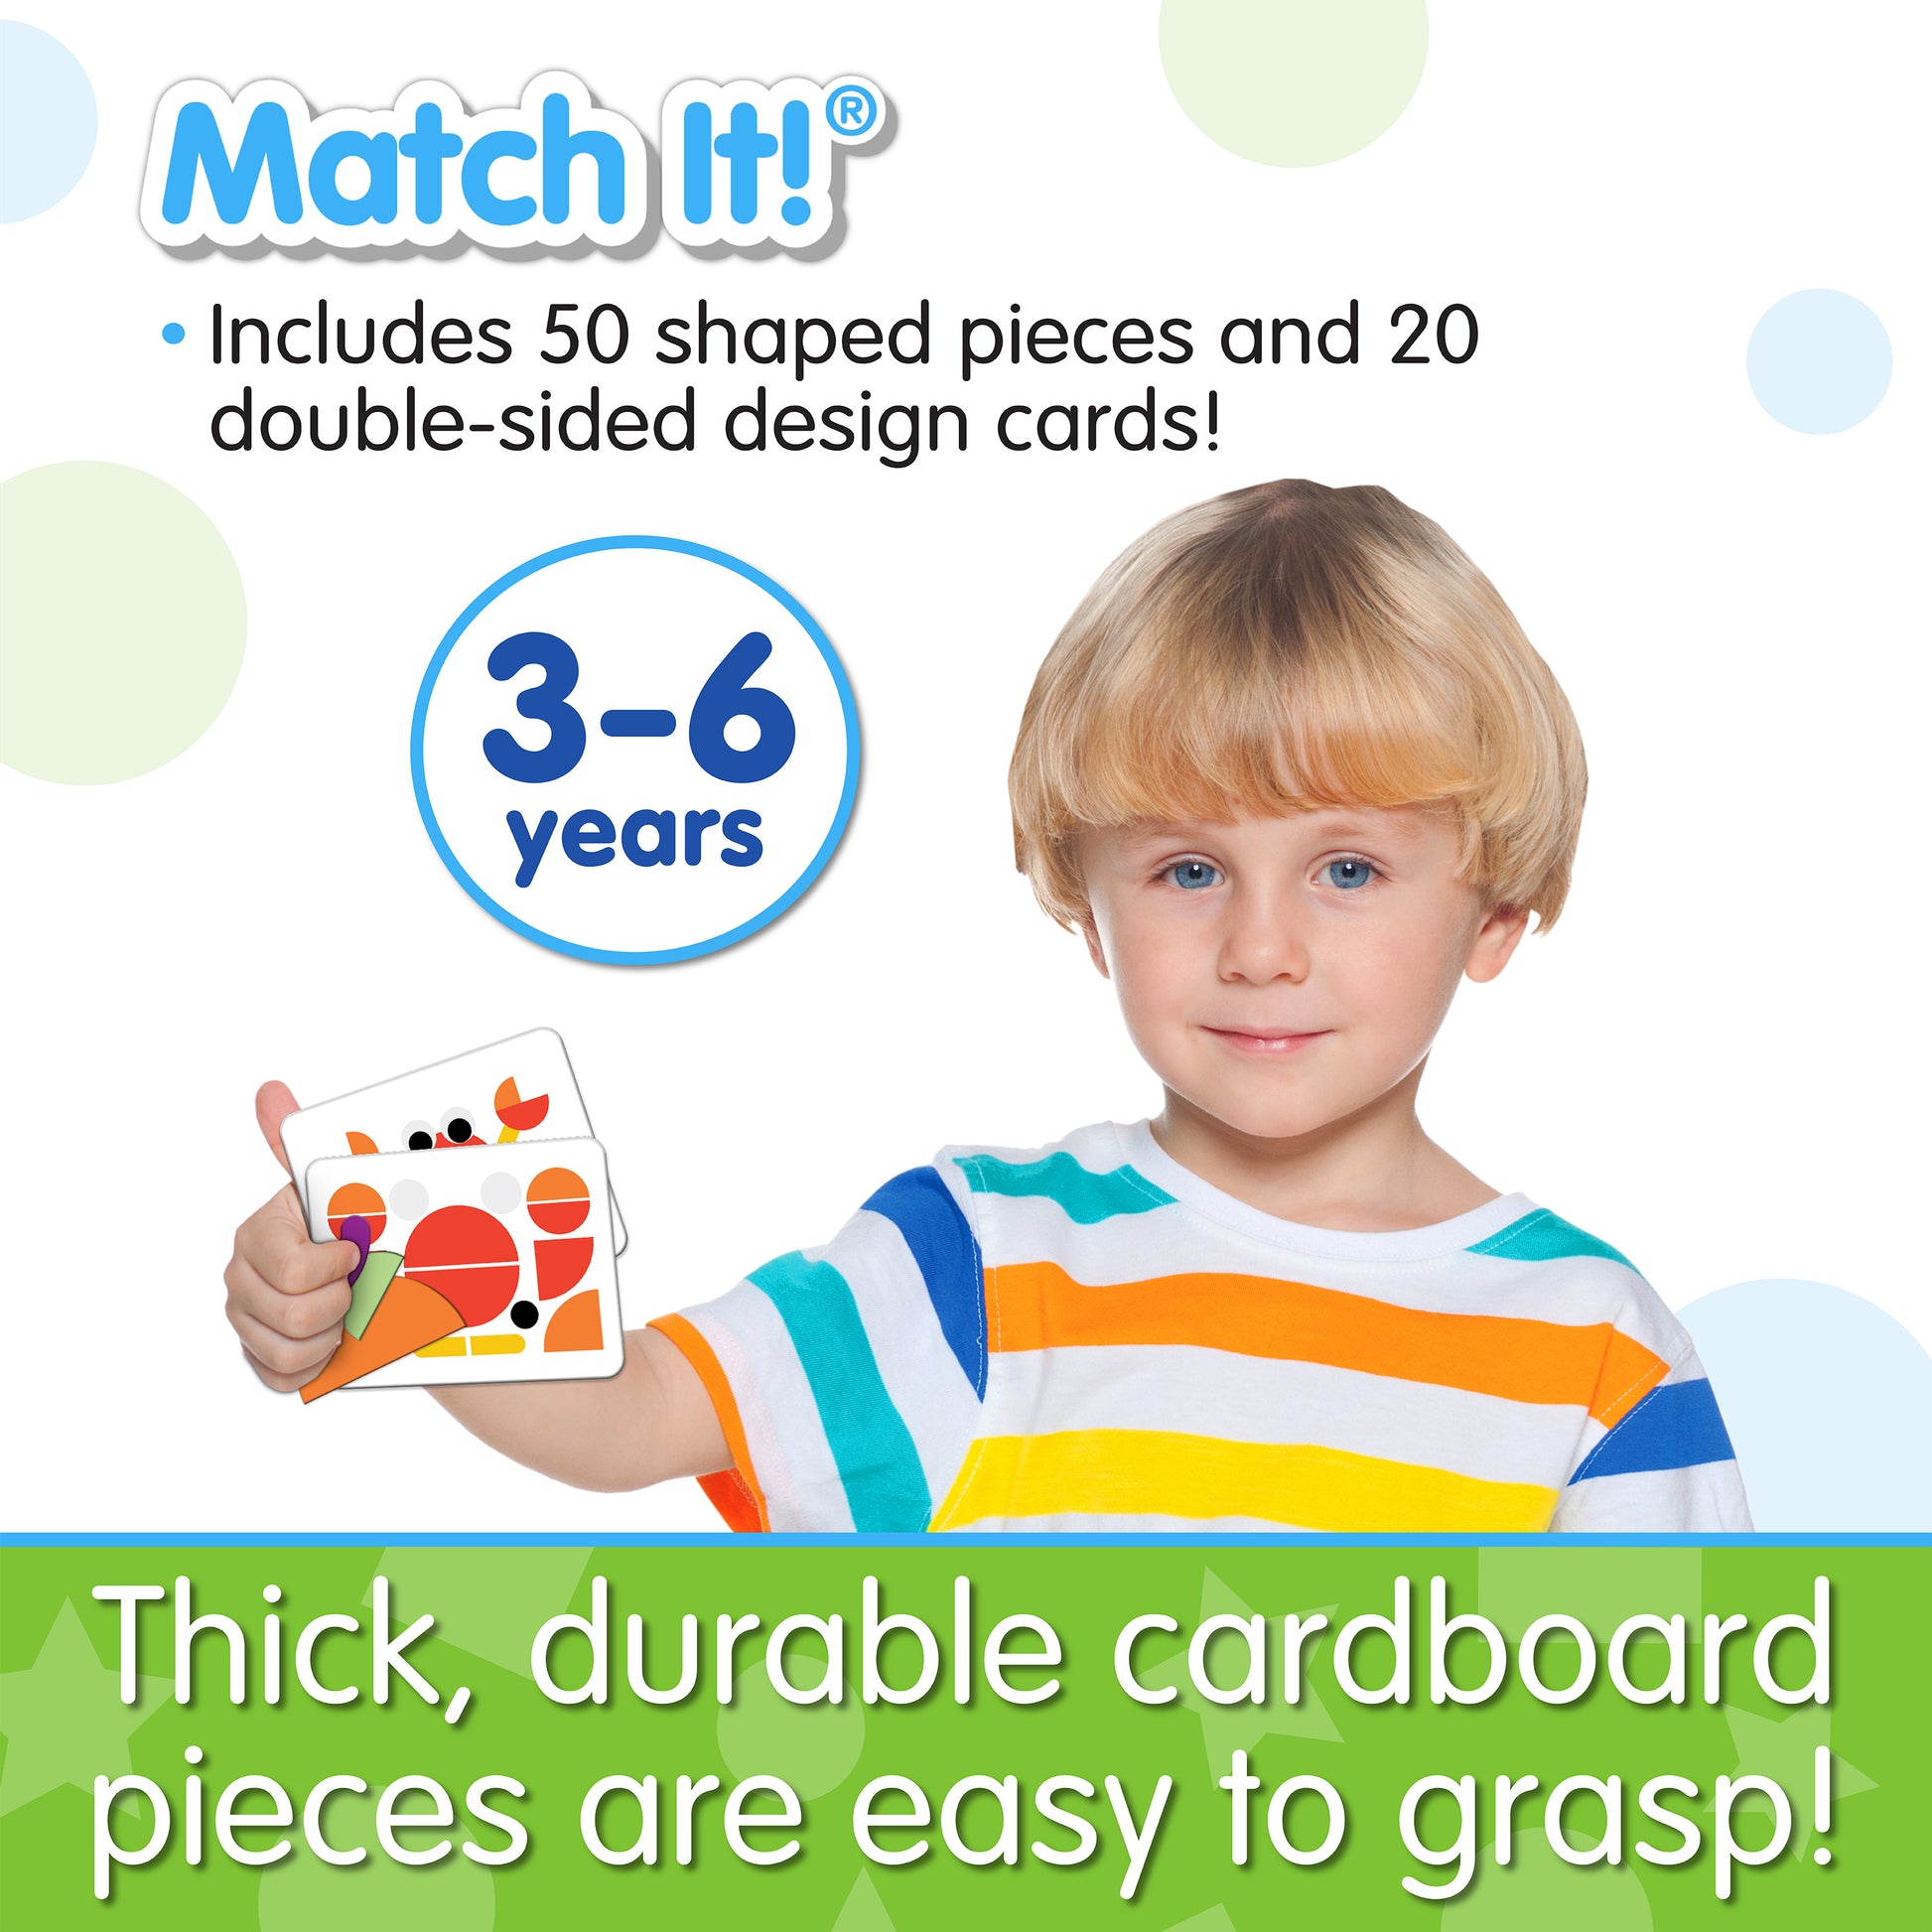 Infographic of young boy holding Match It - Tangrams that says, "Thick, durable cardboard pieces are easy to grasp!"